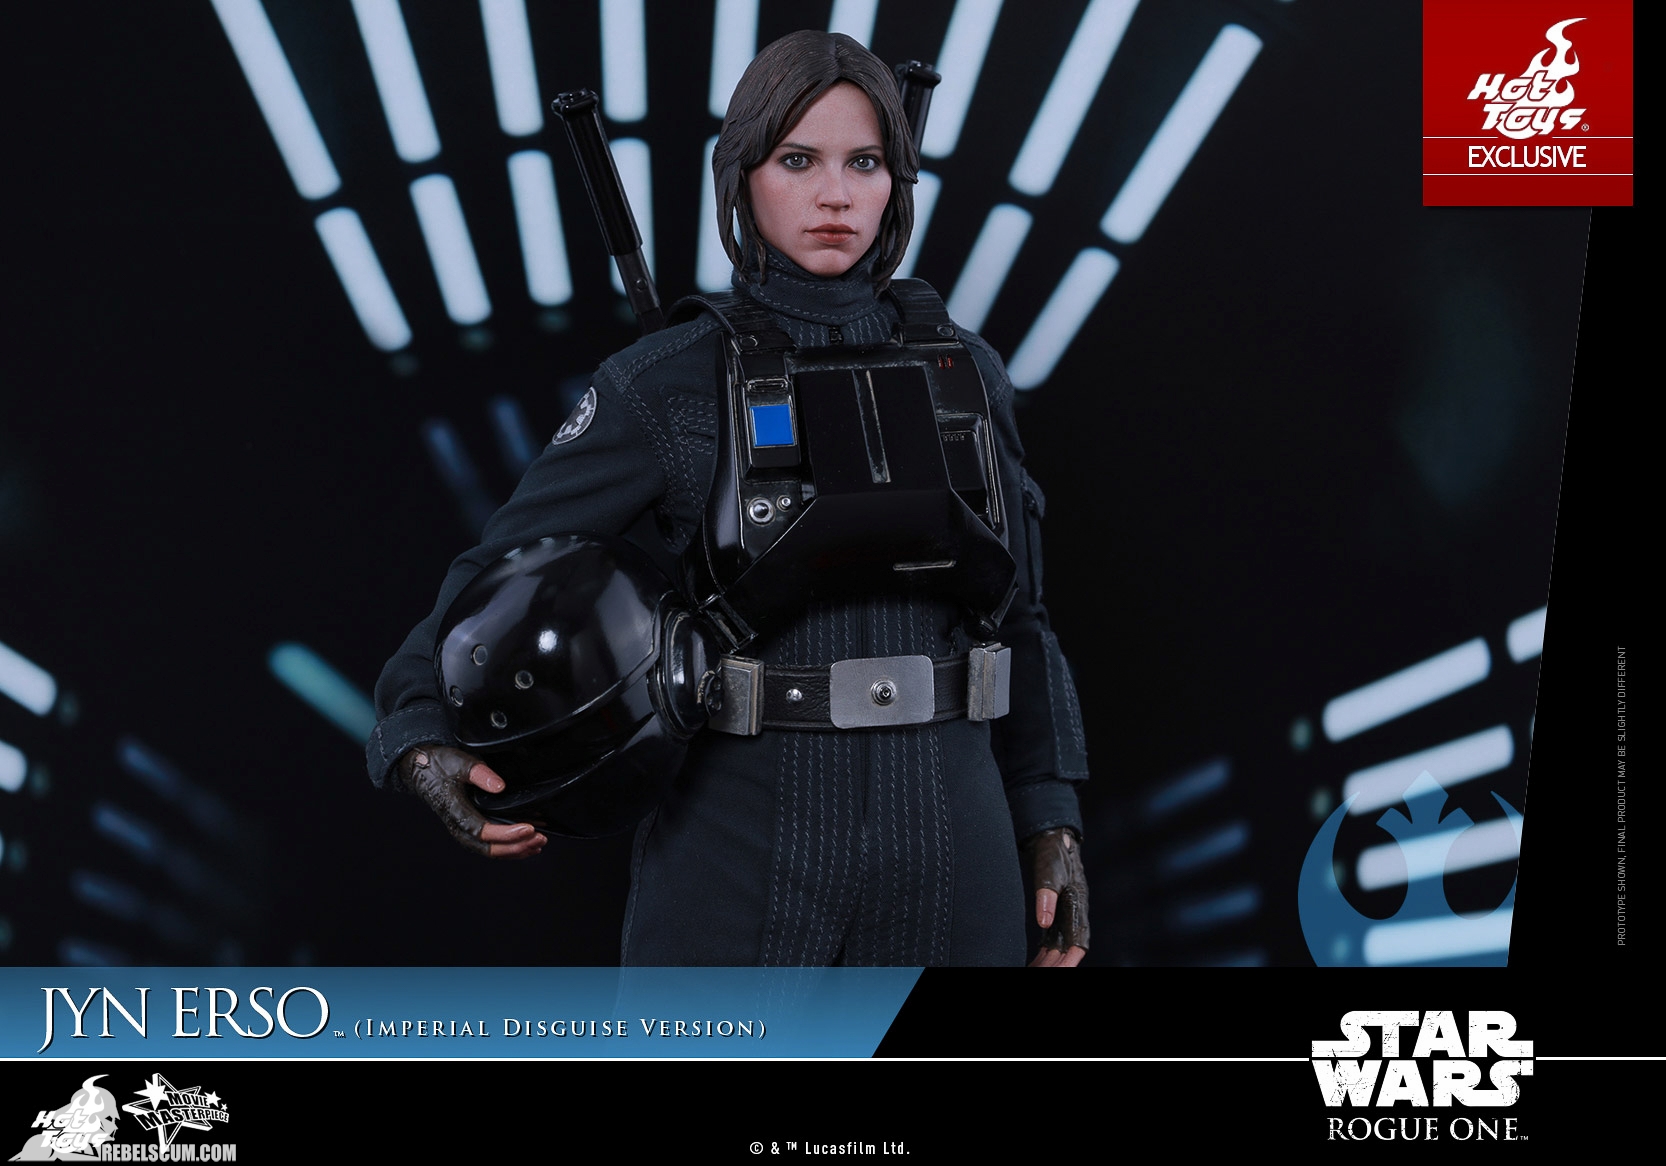 Hot-Toys-MMS419-Rogue-One-Jyn-Erso-Imperial-Disguise-008.jpg